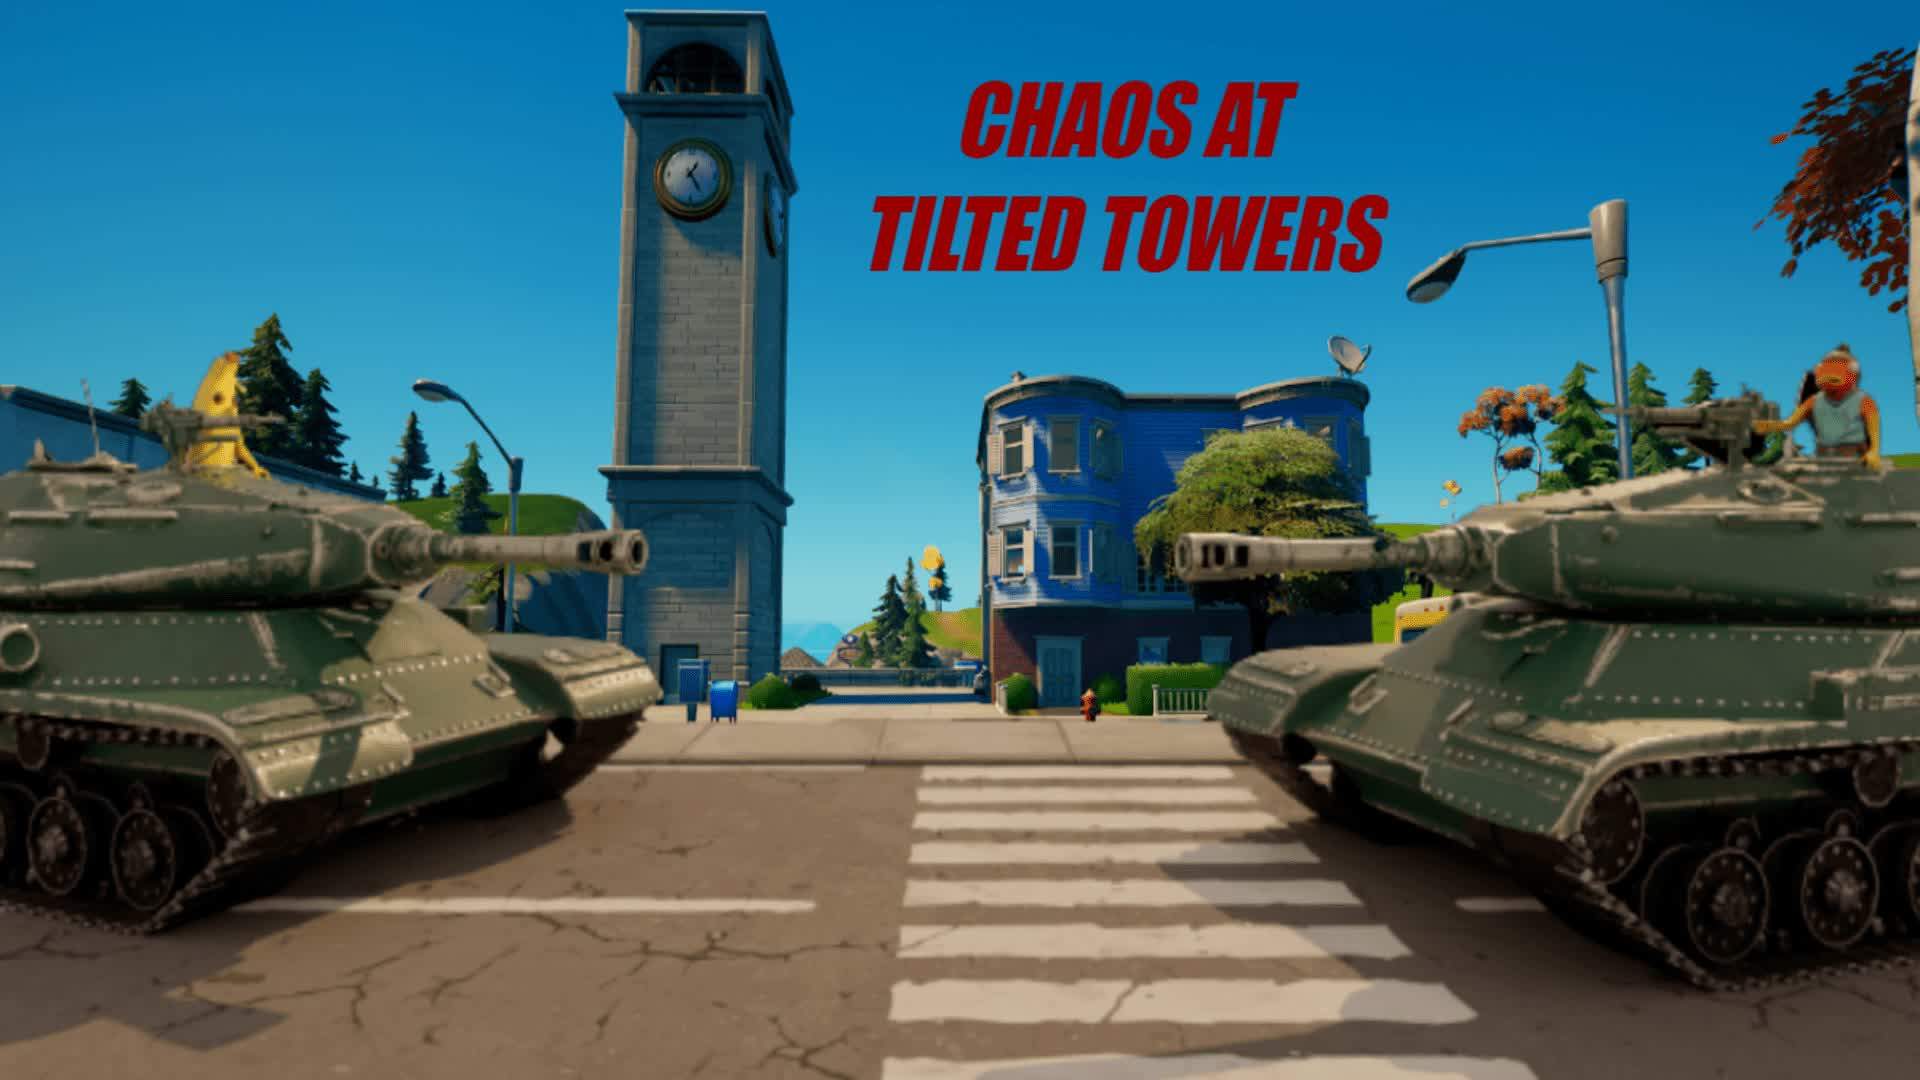 🧨CHAOS AT TILTED TOWERS💥☢️